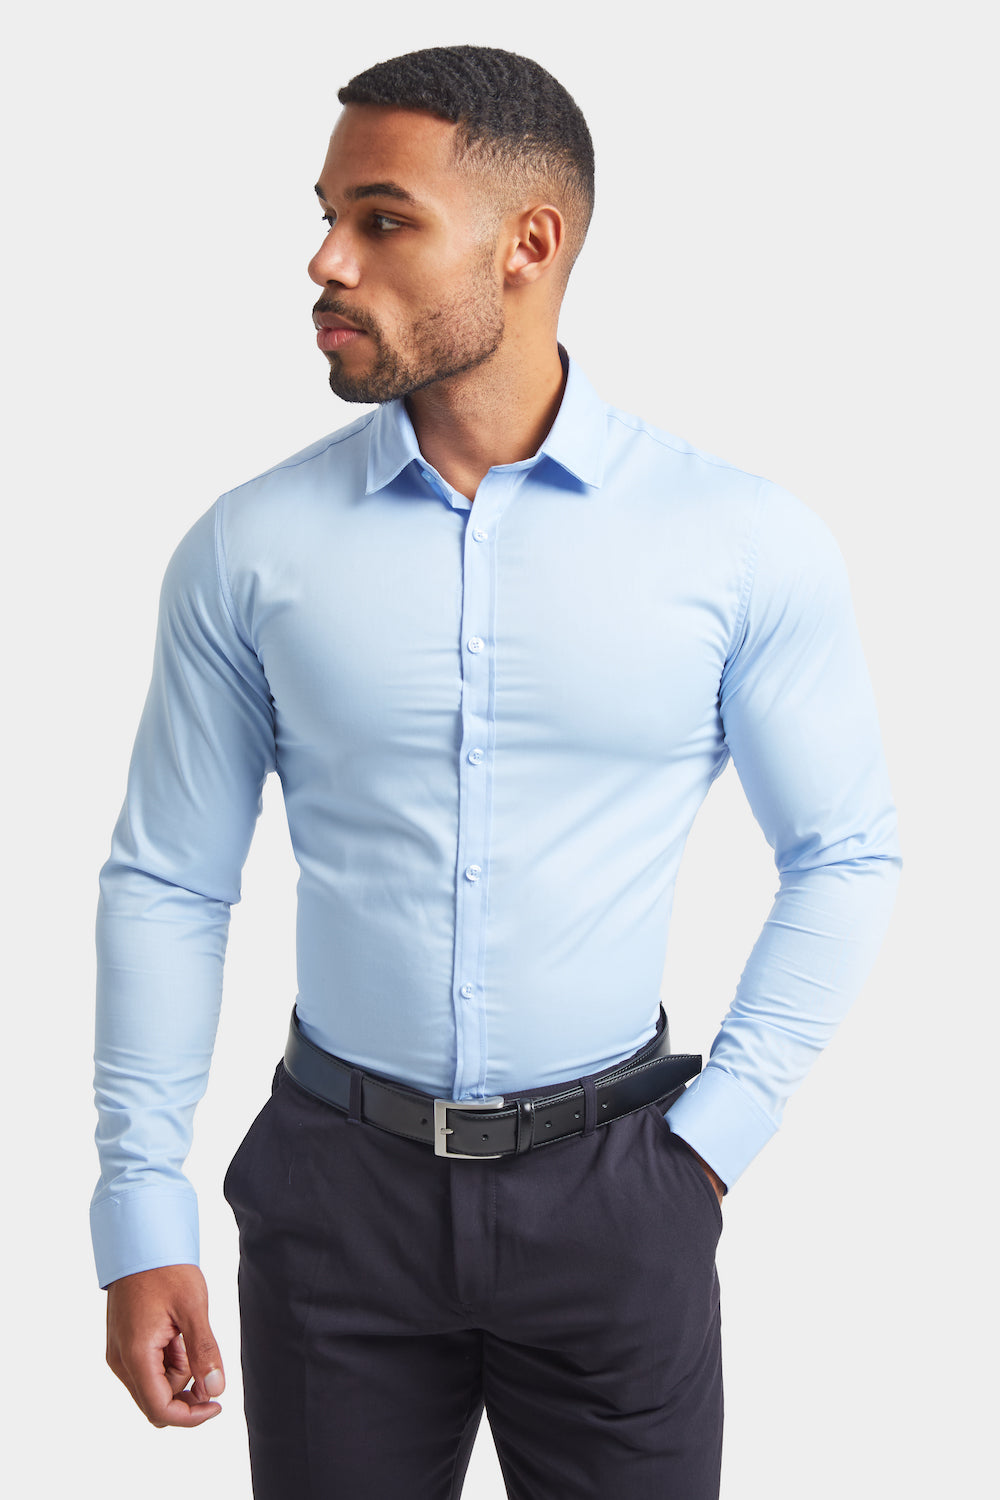 Athletic Fit Dress Shirts - Tailored Athlete - TAILORED ATHLETE - USA